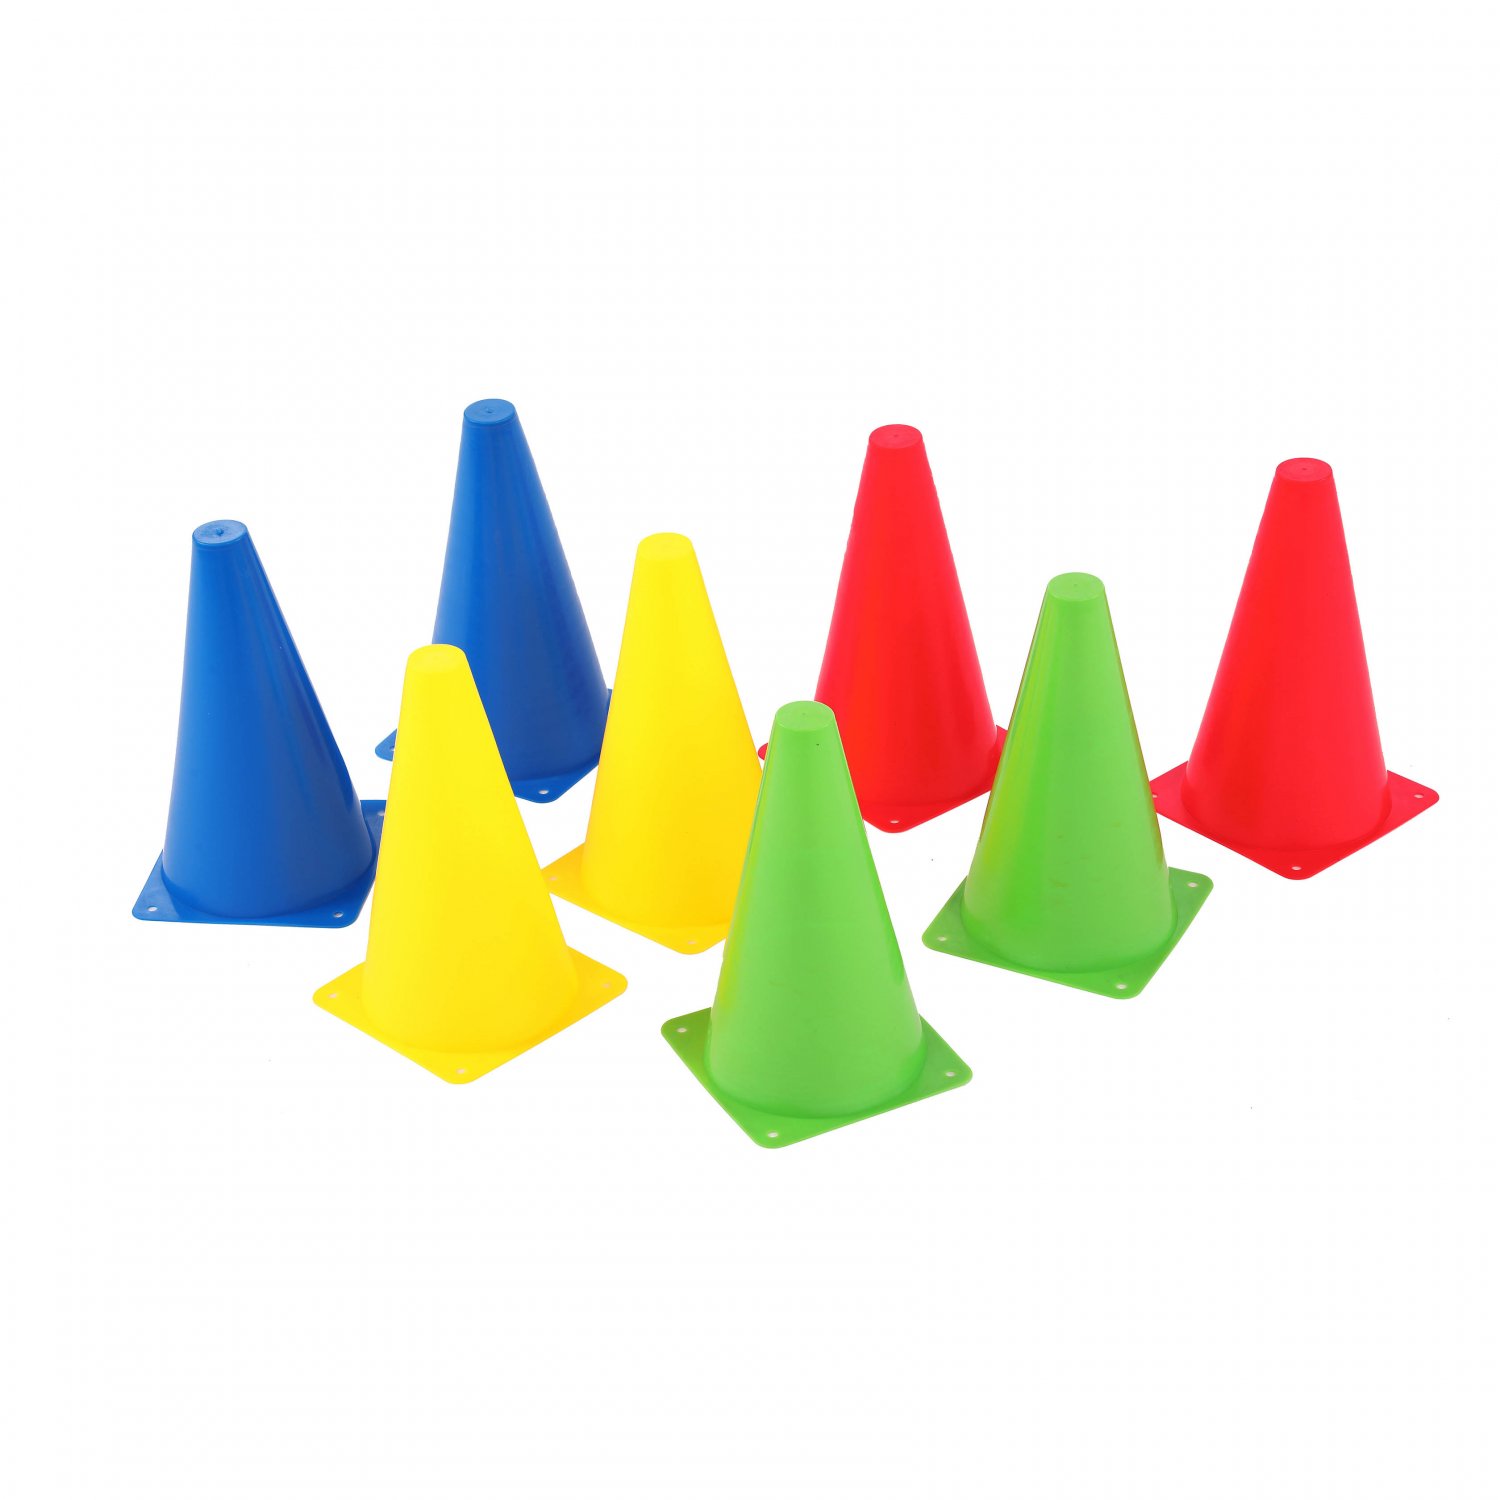 Training Fitness Exercise Games Activity Sports PE Road Cones Marker (set of 8)